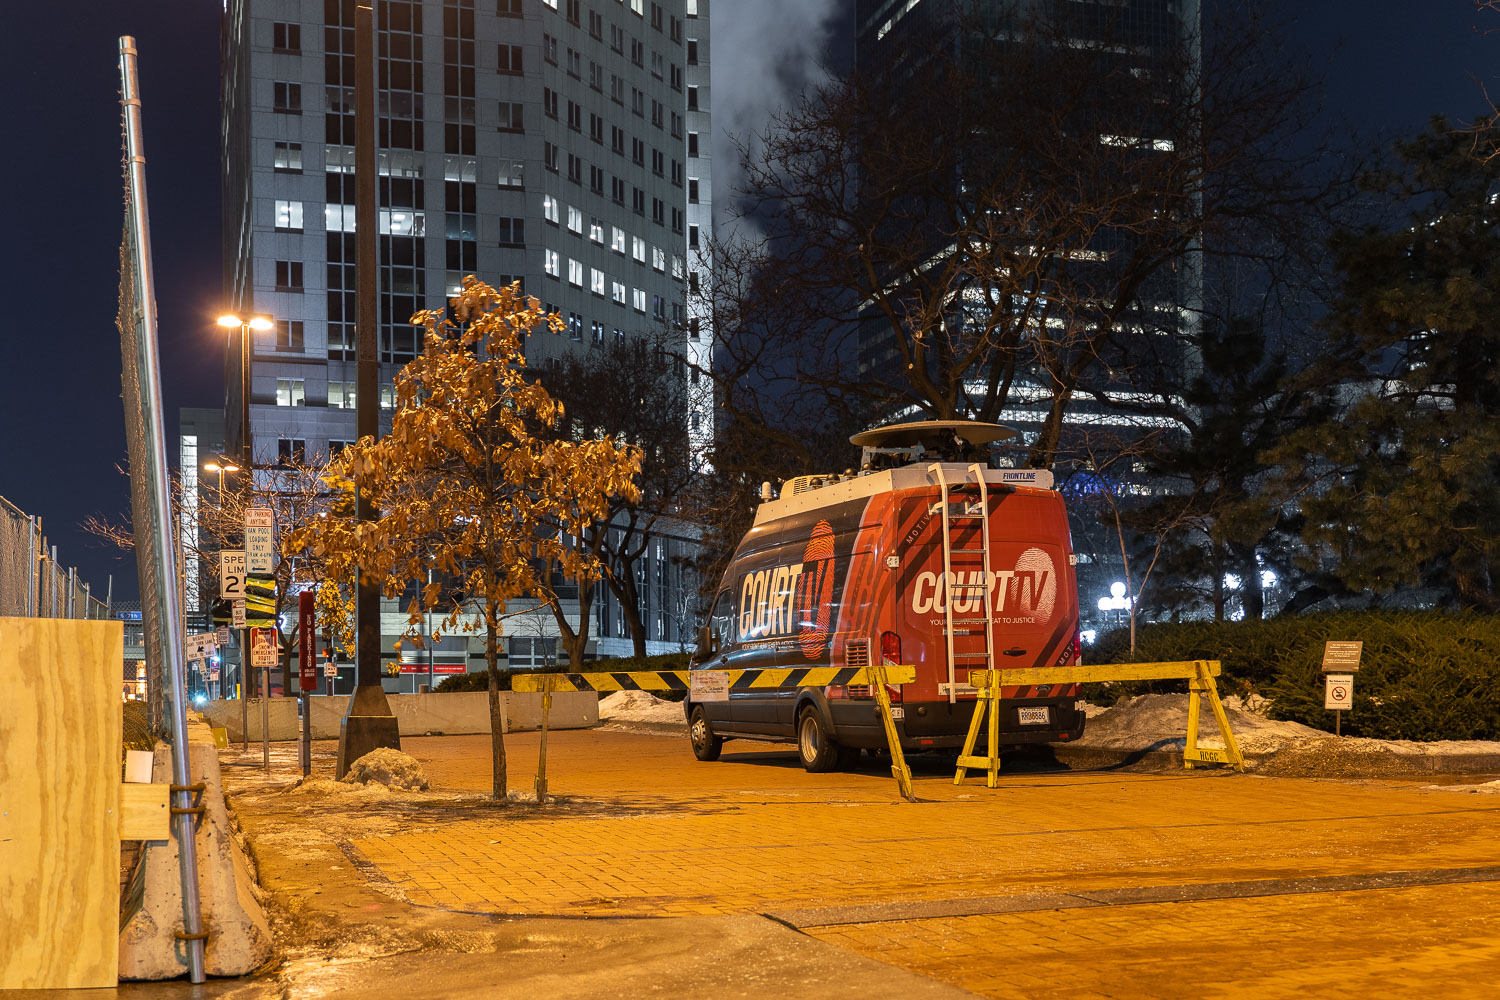 A CourtTV van parked outside the Hennepin County Government Center. CourtTV will be providing the cameras and video feed to the media pool during the Derek Chauvin Trial that begins March 8th. Chauvin is charged in the murder of George Floyd on May 25th, 2020.